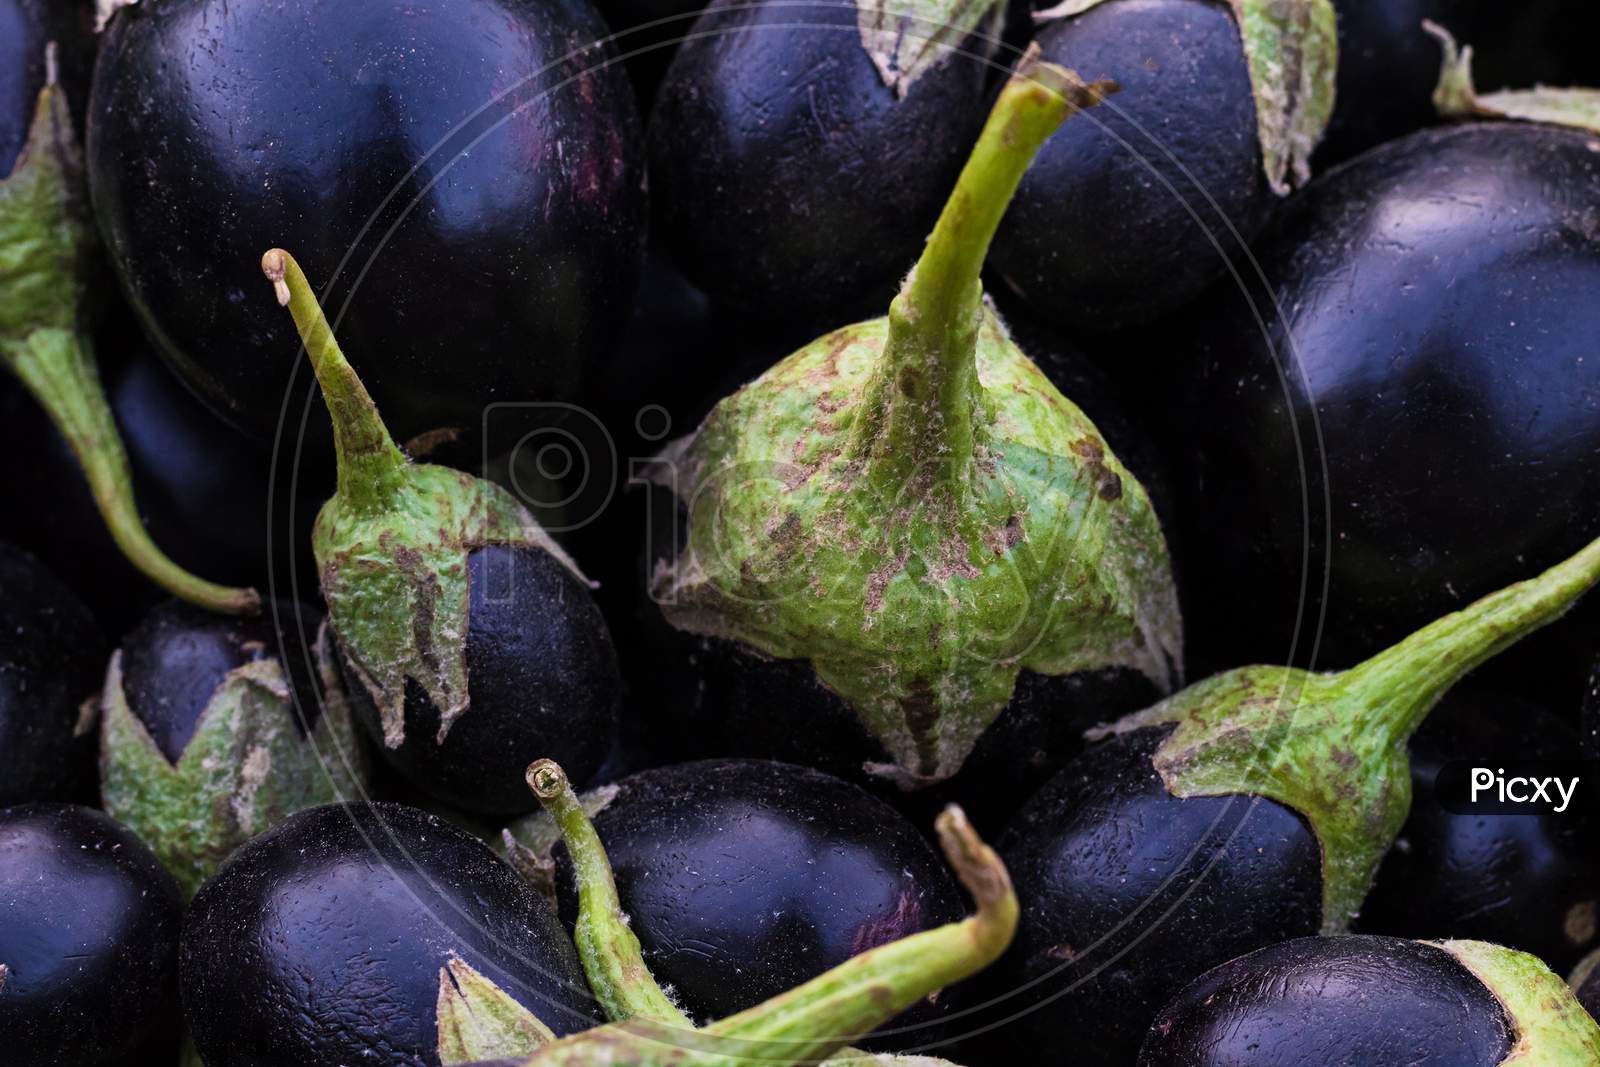 Fresh Purple Aubergine, Bingal Or Egg Plant Used In Cooking As Vegetable, Close-Up Shot Can Be Use As Background